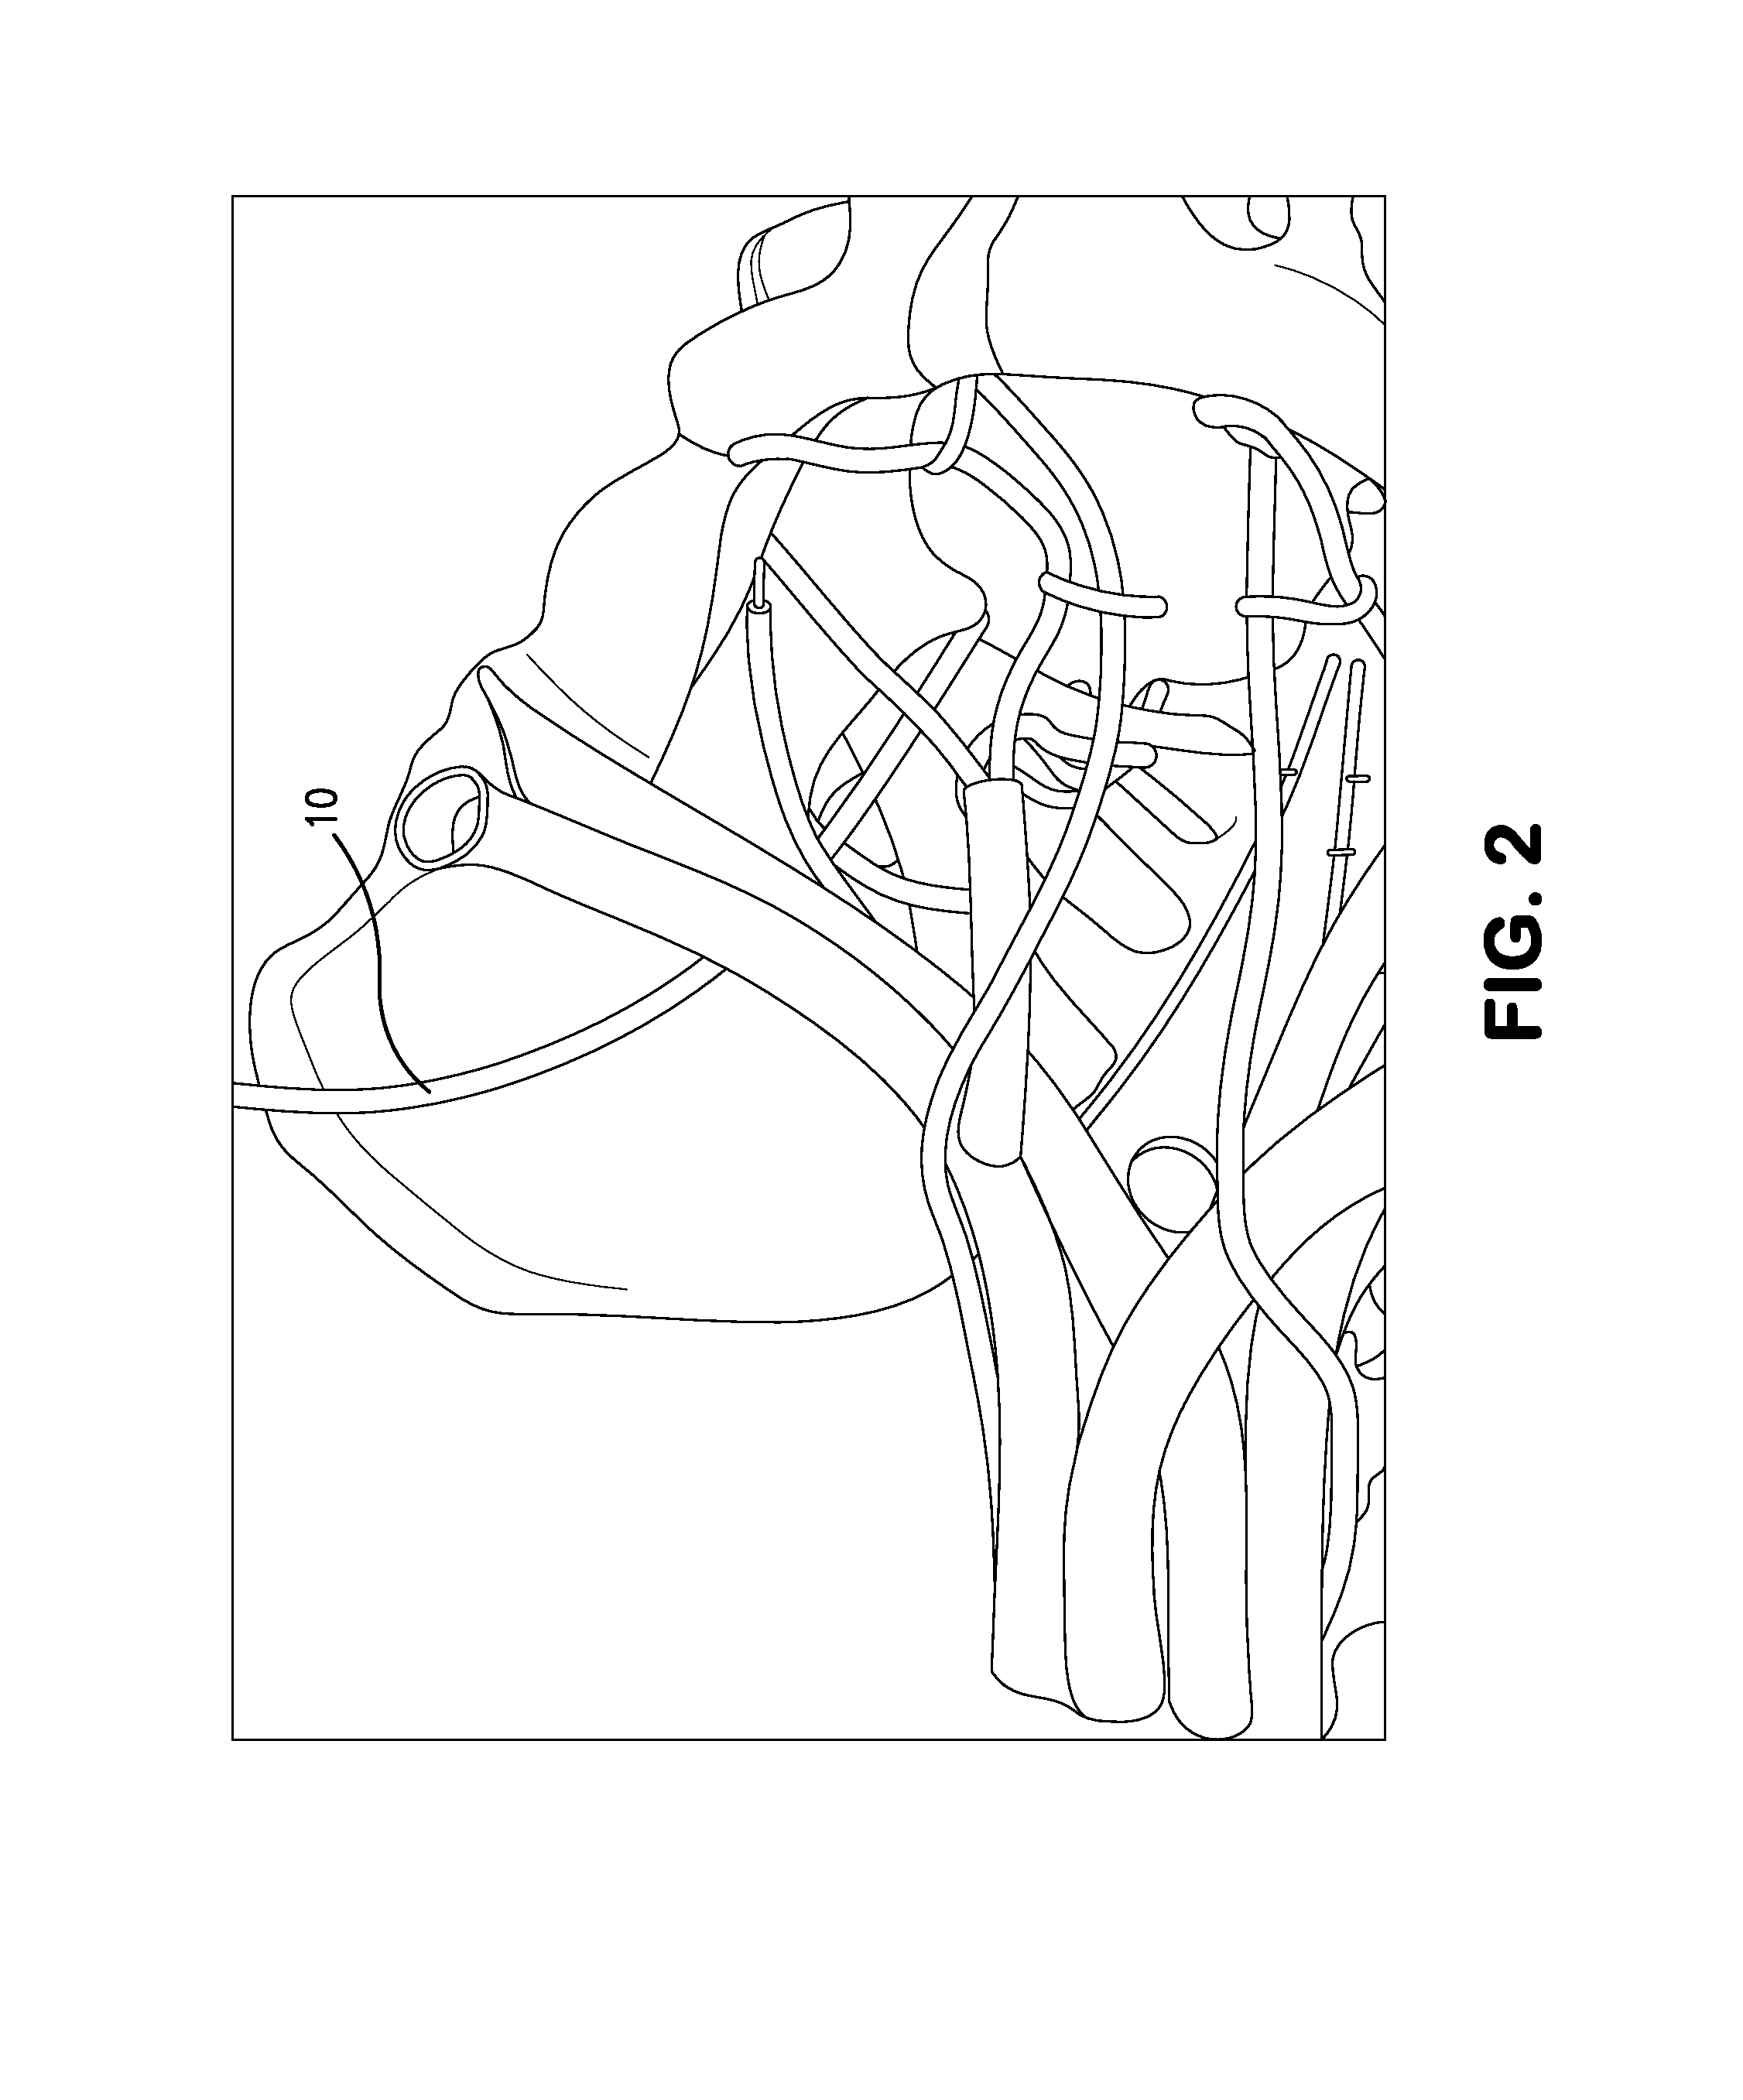 System and method for implantation of lead and electrodes to the endopelvic portion of the pelvic nerves and connection cable for electrode with direction marker